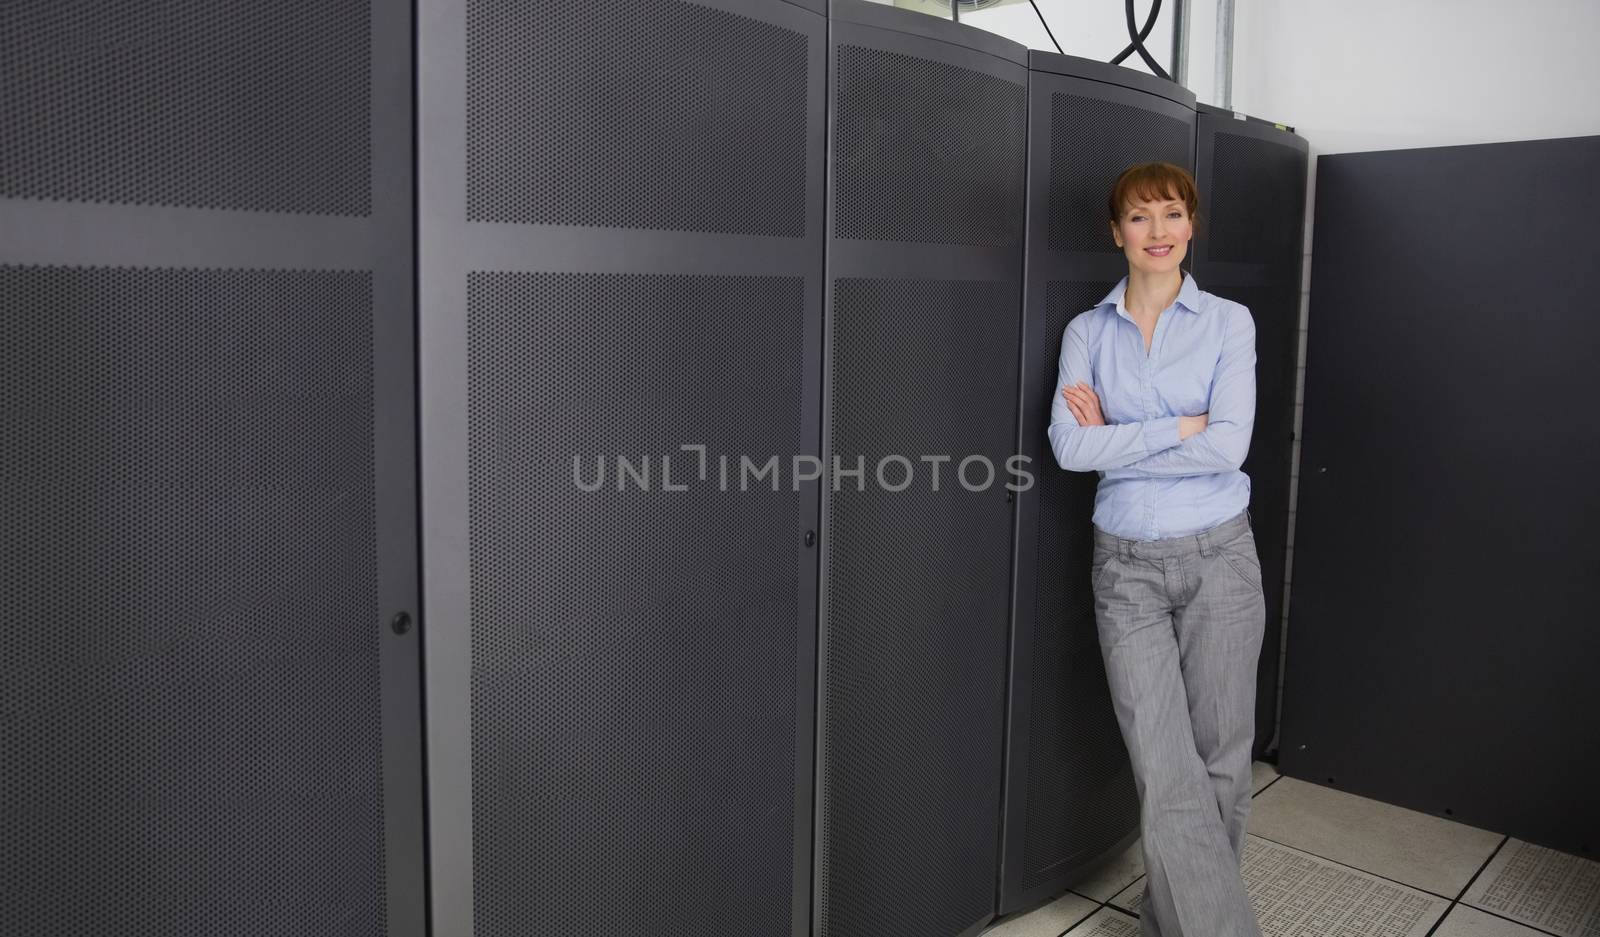 Pretty technician smiling at camera beside server towers in large data center